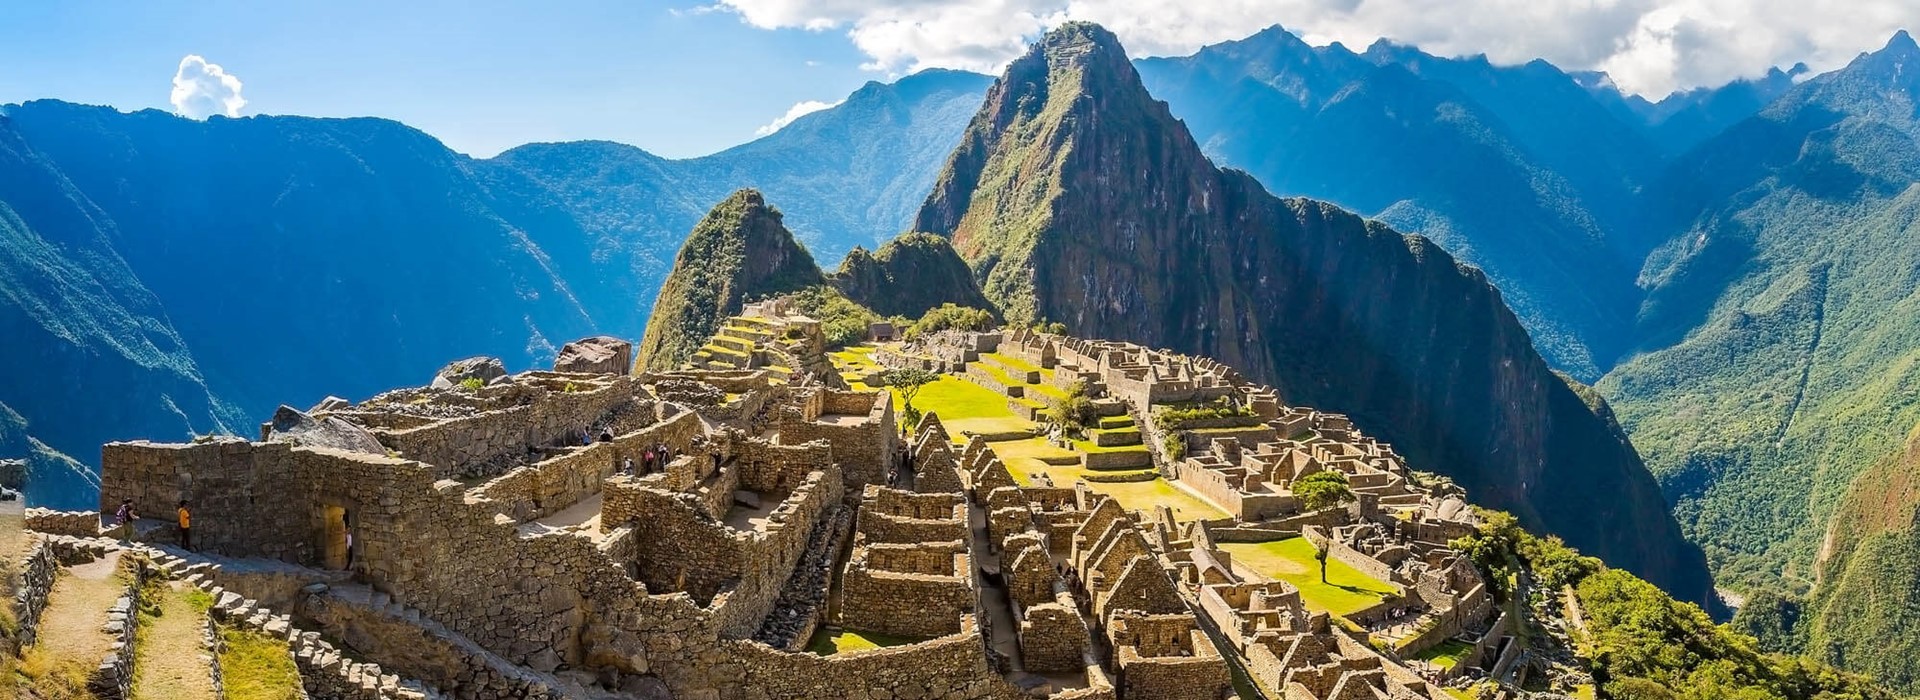 tourhub | Newmarket Holidays | Peru – Land of the Incas with Amazon Extension 